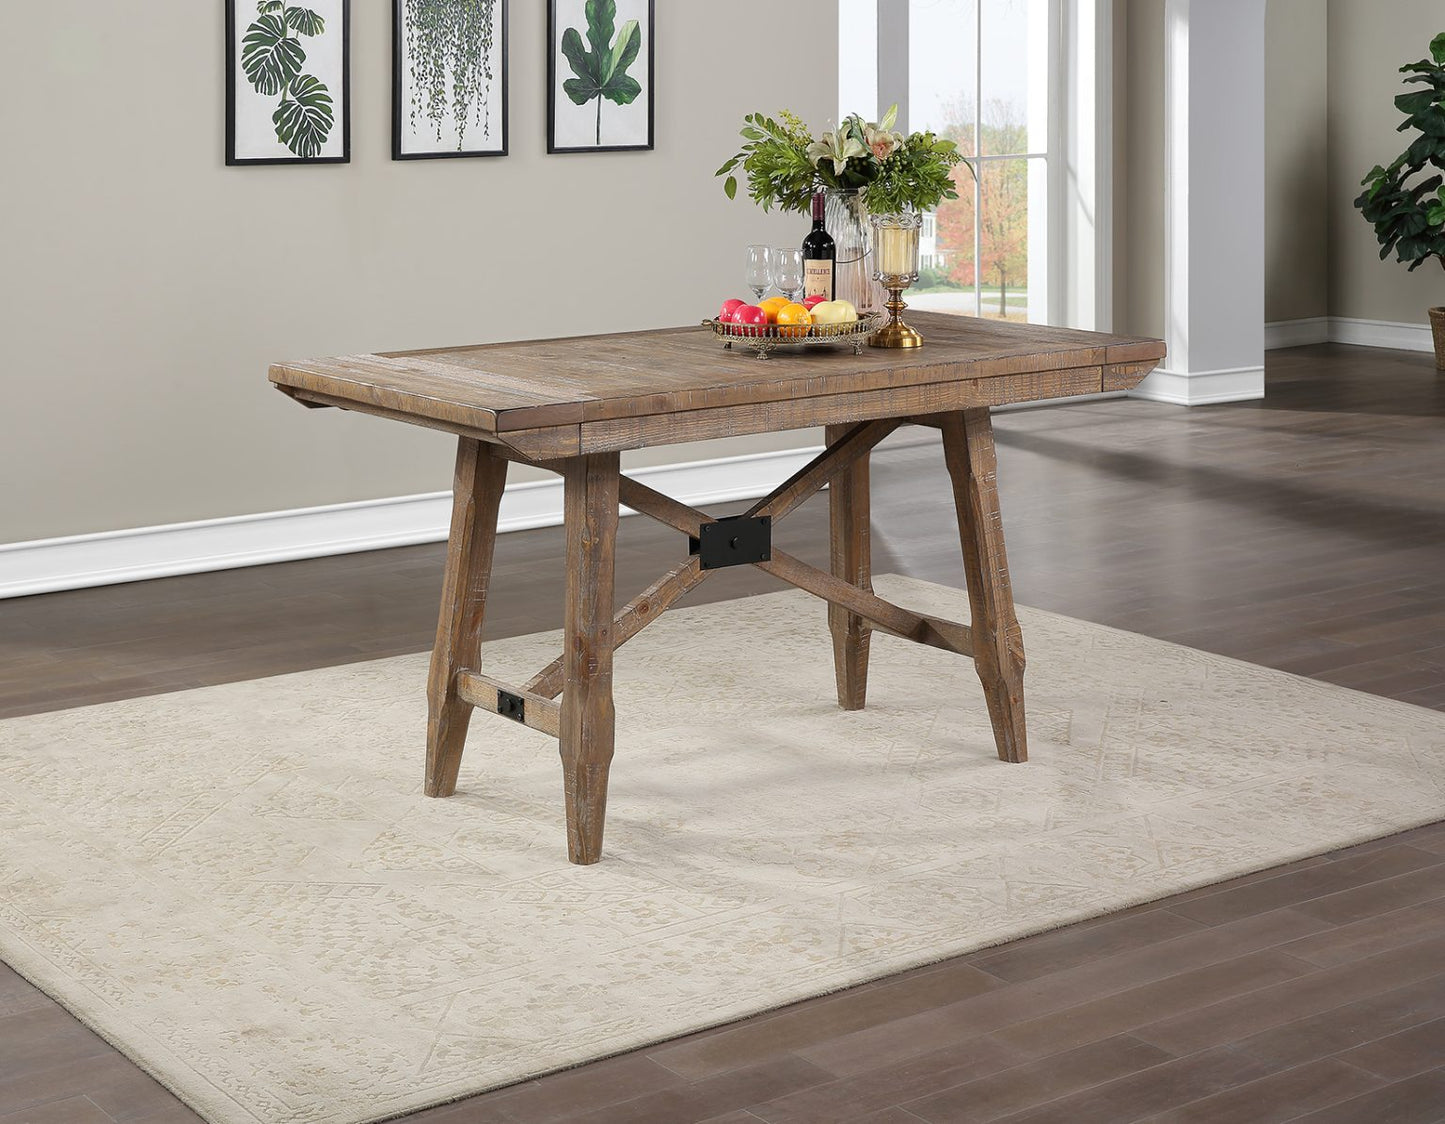 Riverdale Counter Table & Counter Height Stools